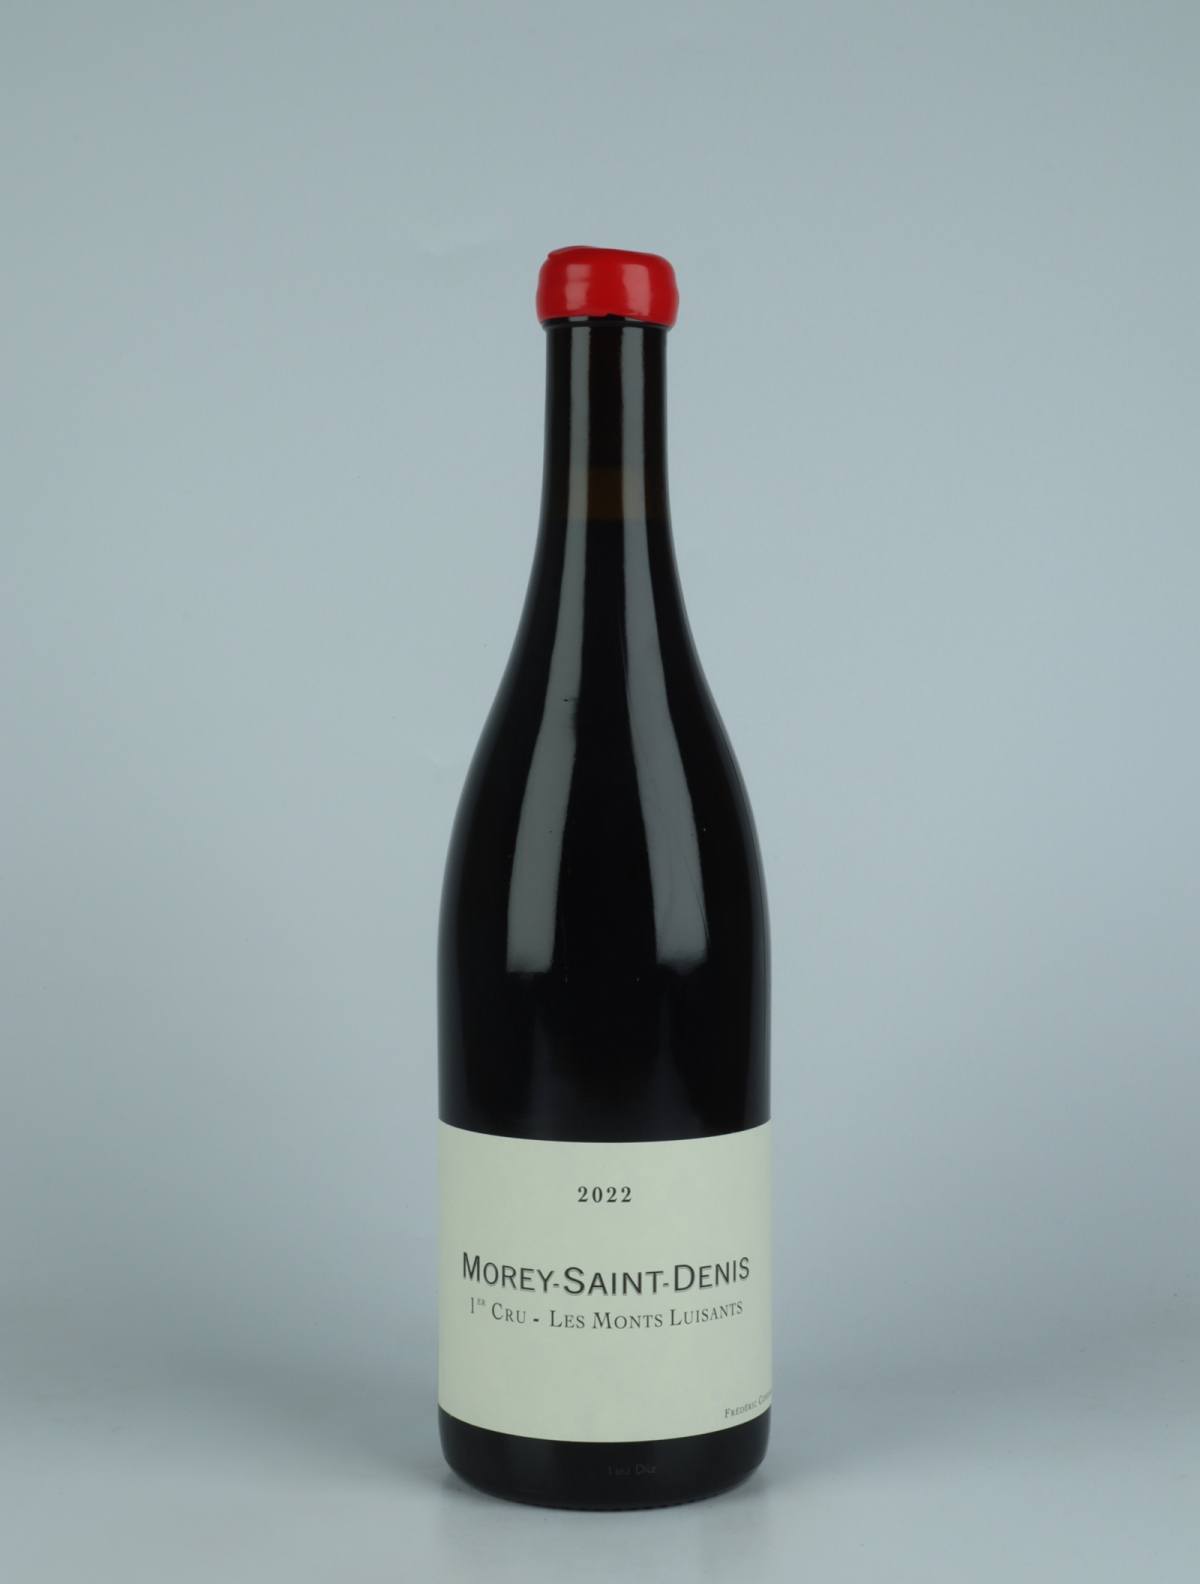 A bottle 2022 Morey Saint Denis 1. Cru - Les Monts Luisants Red wine from Frédéric Cossard, Burgundy in France